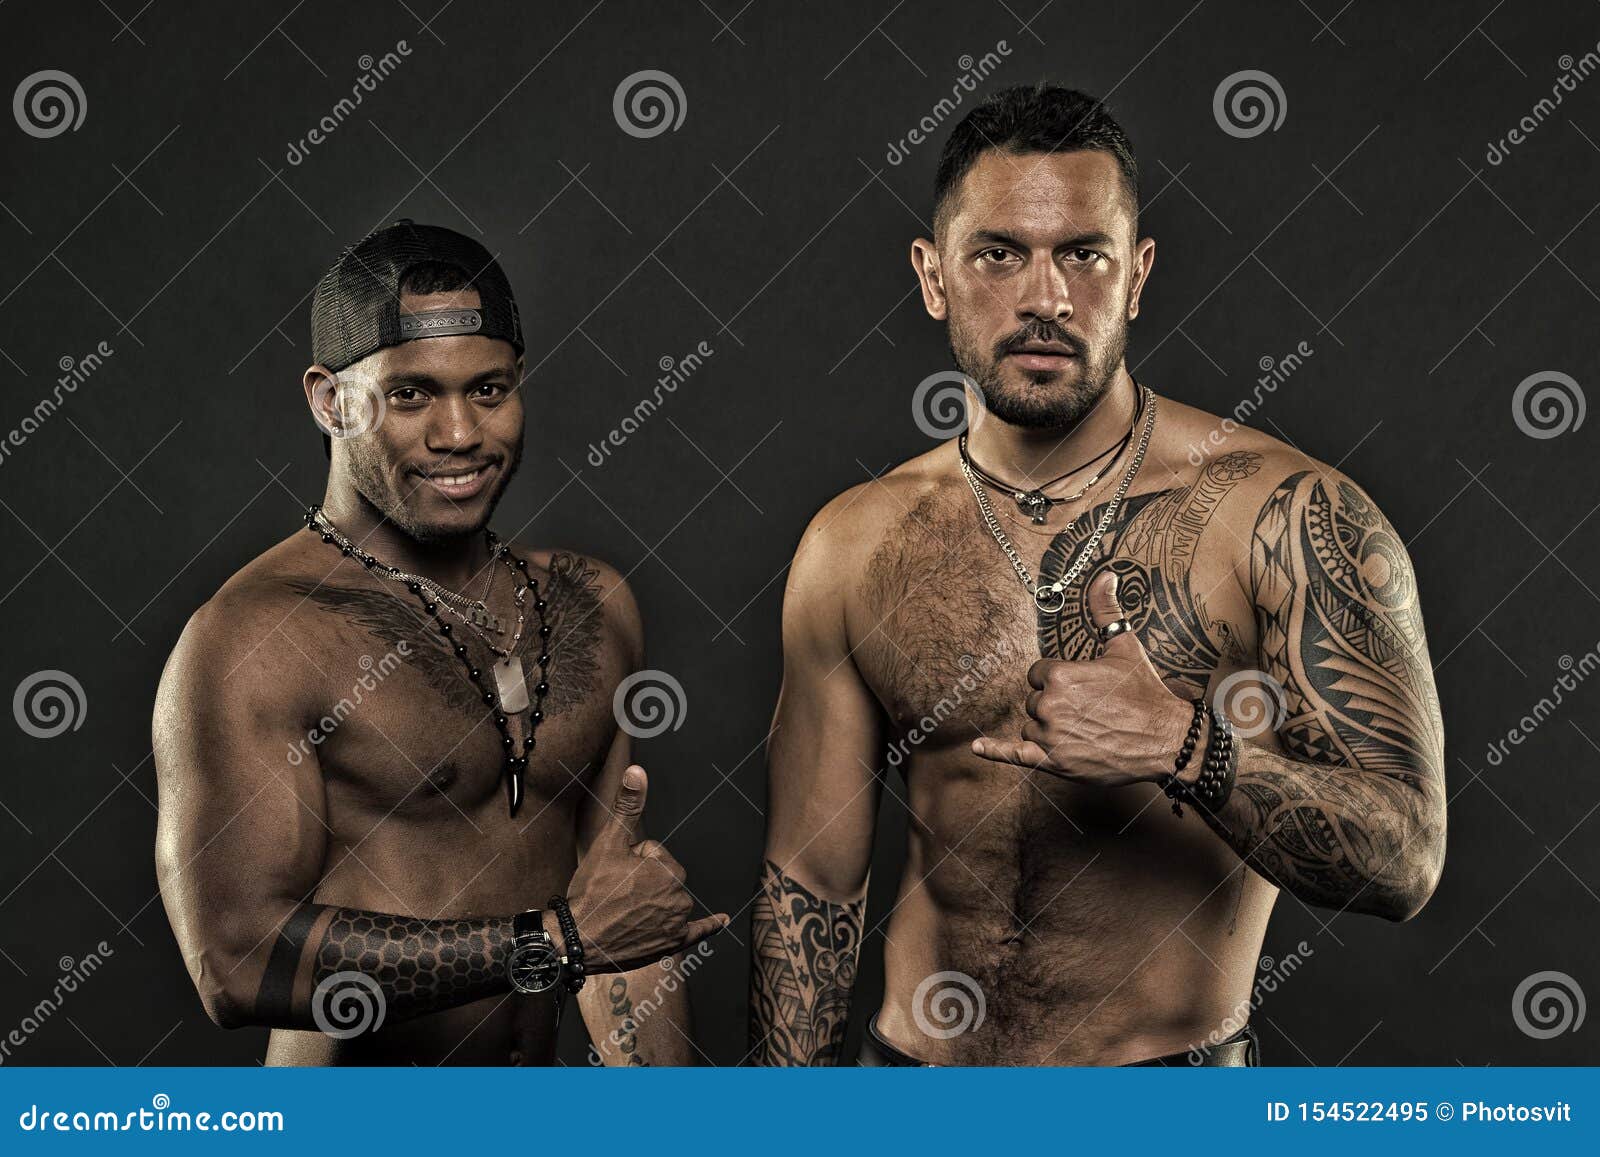 Tattoo Culture Concept. Tattoo Brutal Attribute. Men Brutal Attractive  Hispanic Appearance Tattooed Body Stock Image - Image of culture, handsome:  154522495